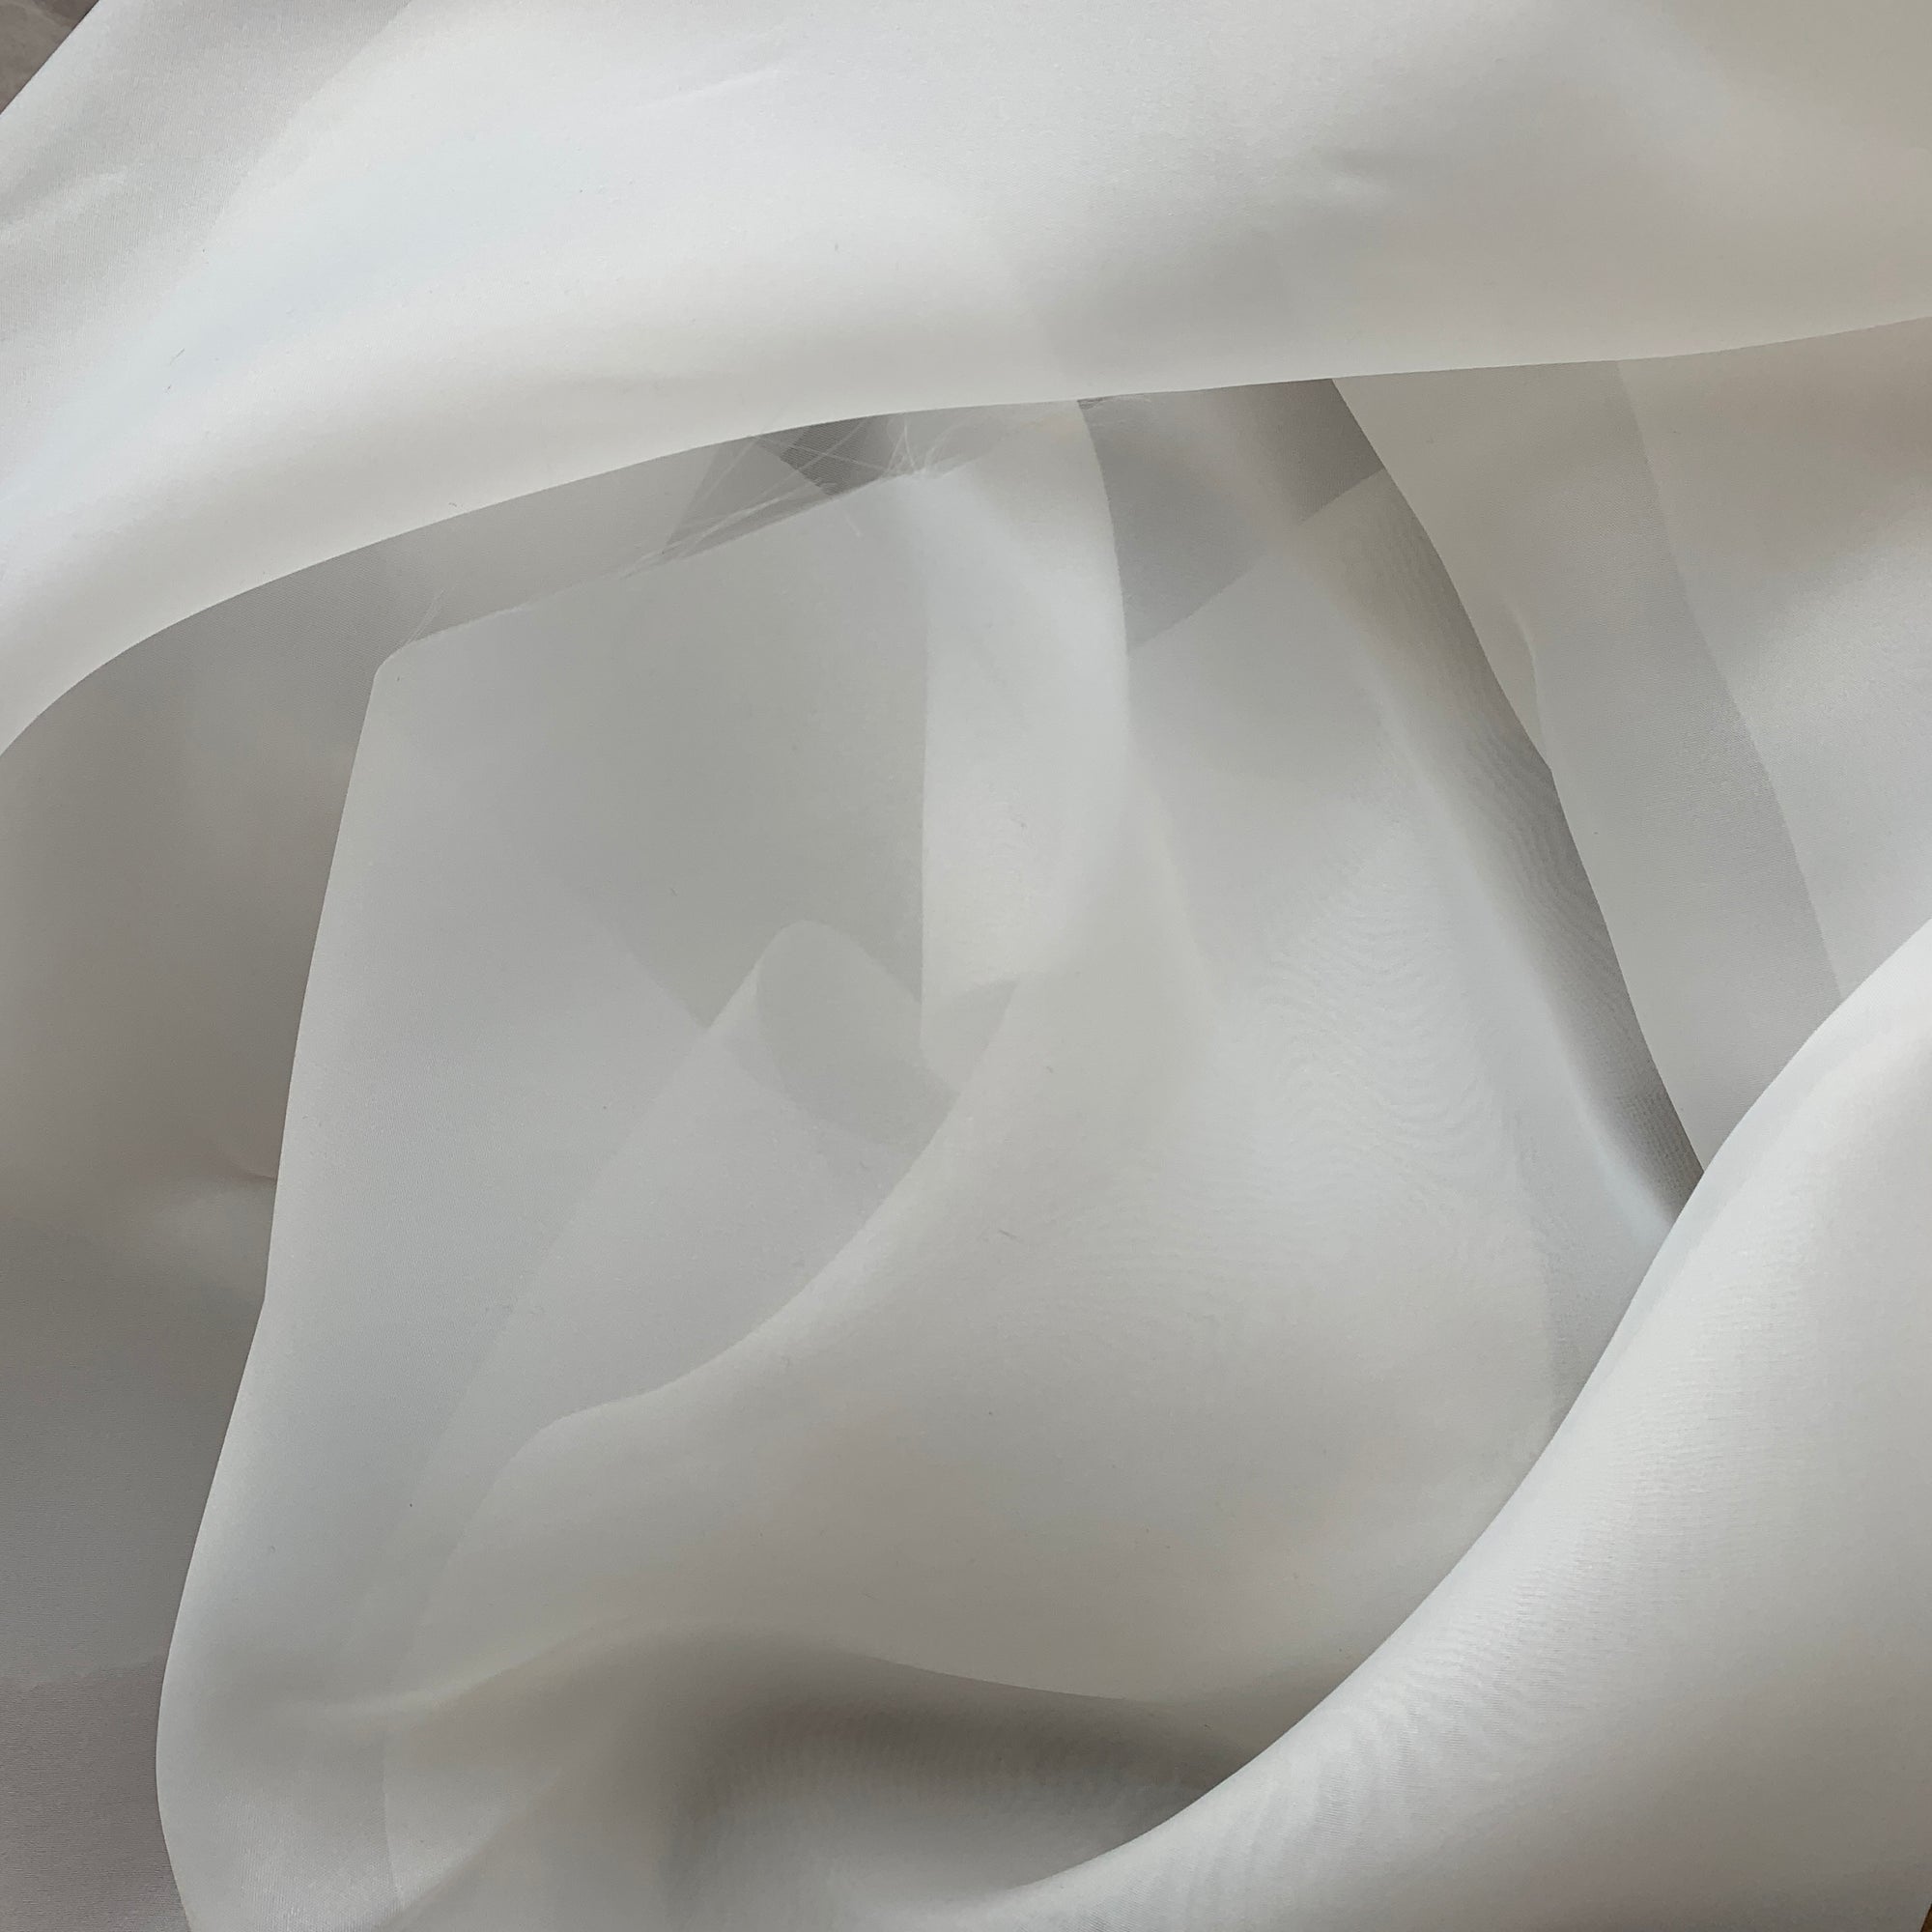 Illustrating Gazar Satin Organza a ivory colored lustrous poly organza with a soft hand-feel